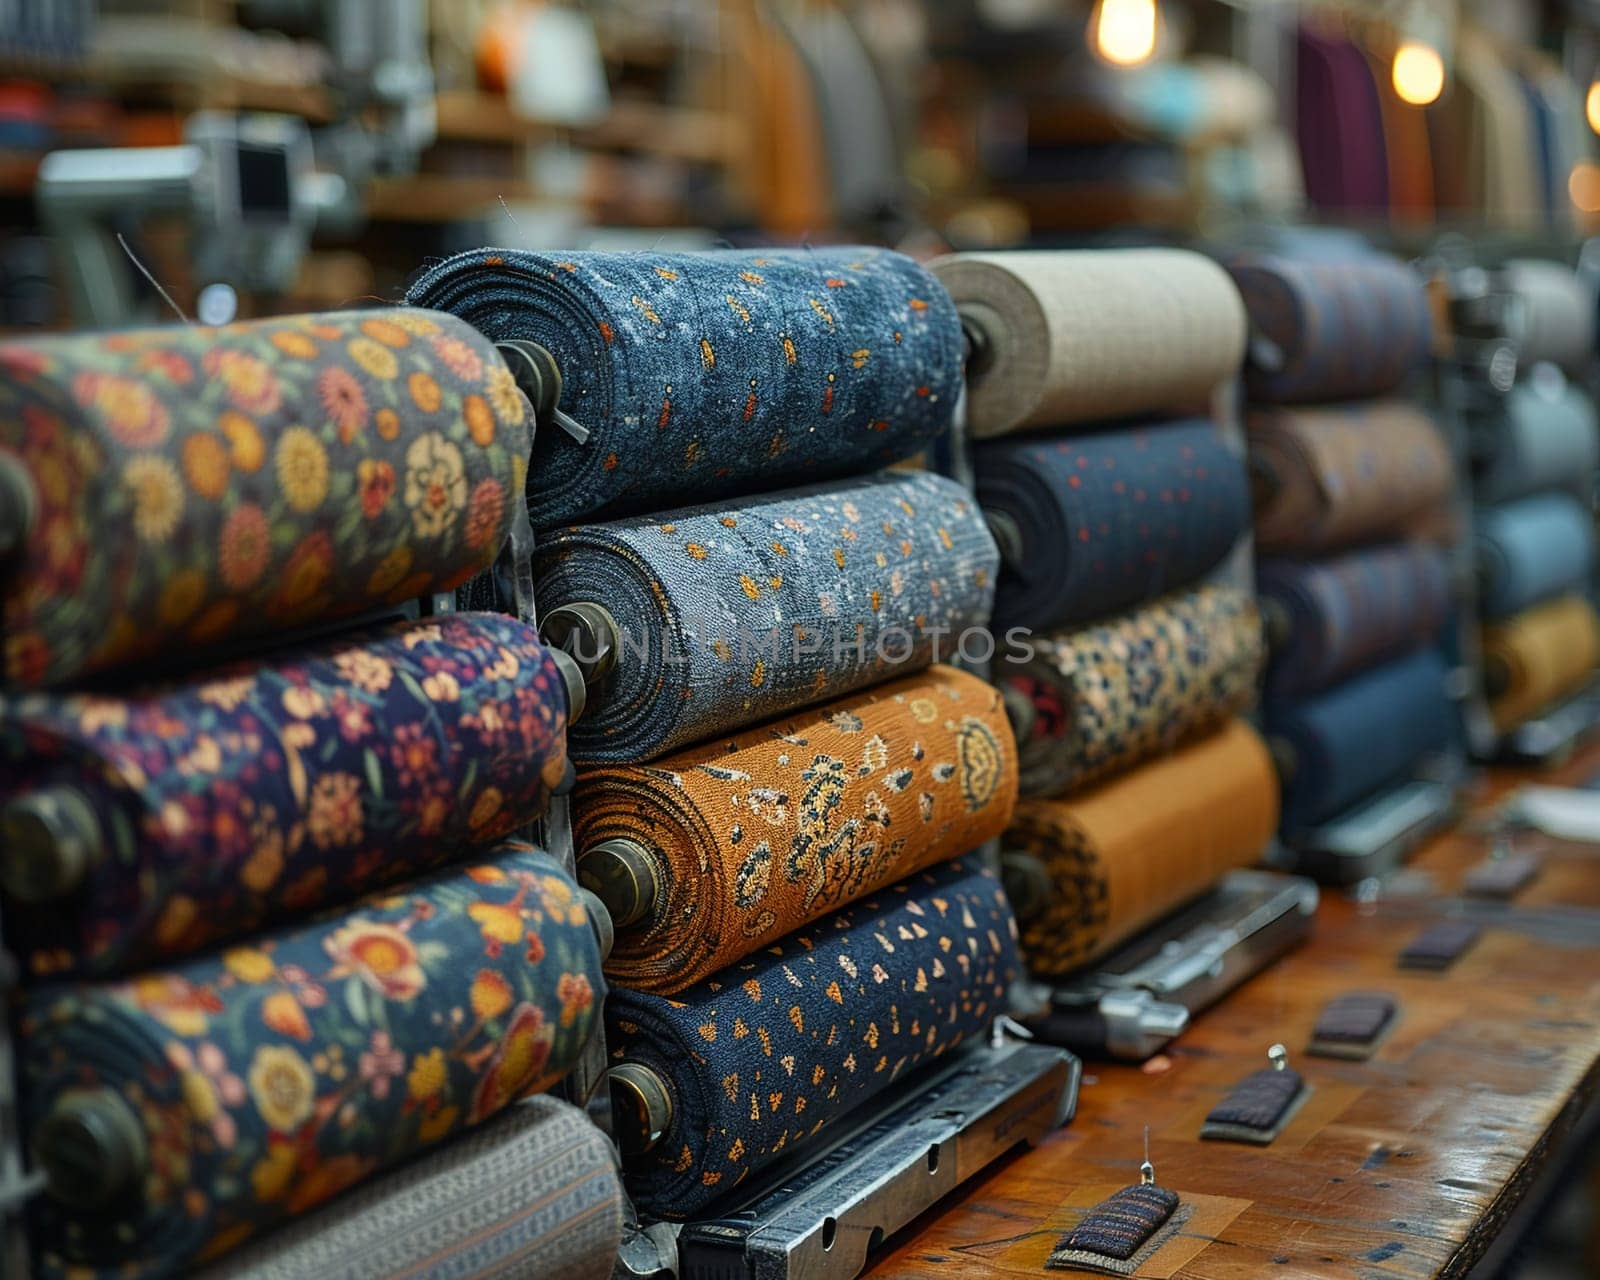 Tailor Crafts Bespoke Garments for Discerning Business Clients, The hum of sewing machines and swatches of fabric tell a tale of personalized fashion in business.